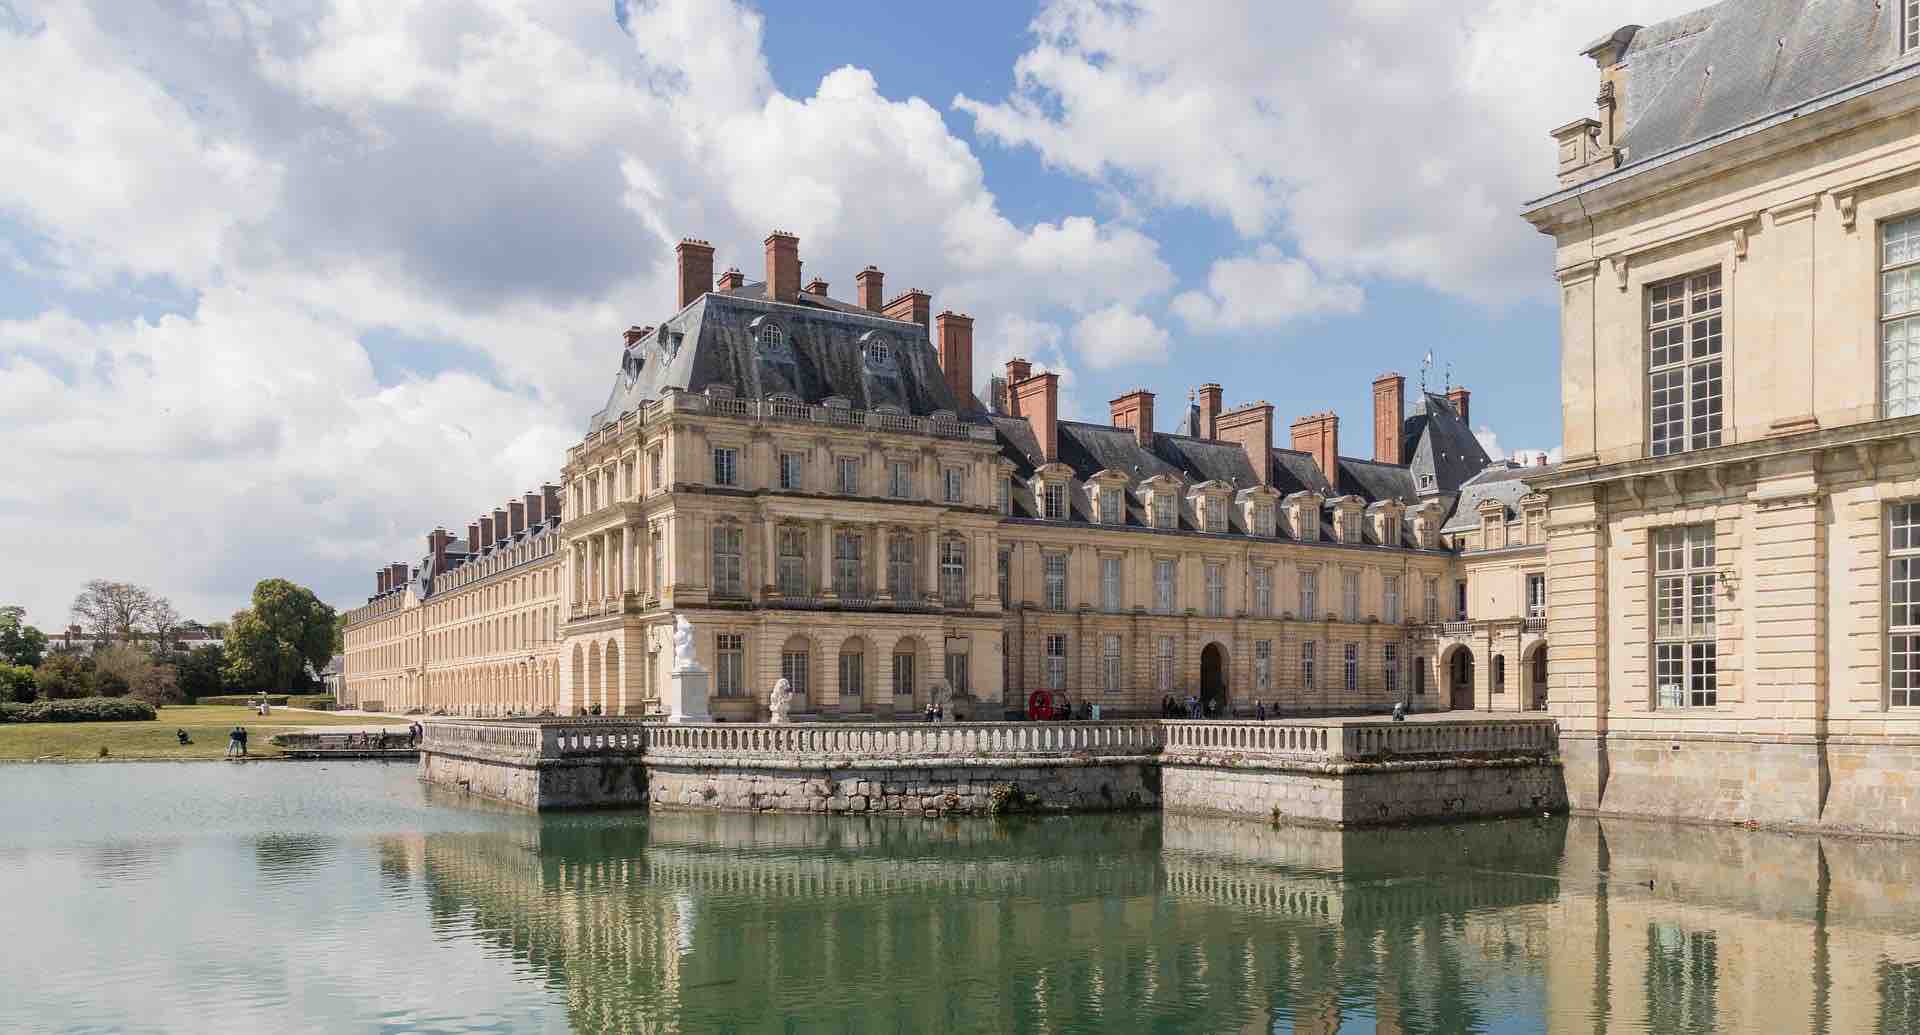 The castle of Fontainebleau (77) >> E-ticket, schedules, access